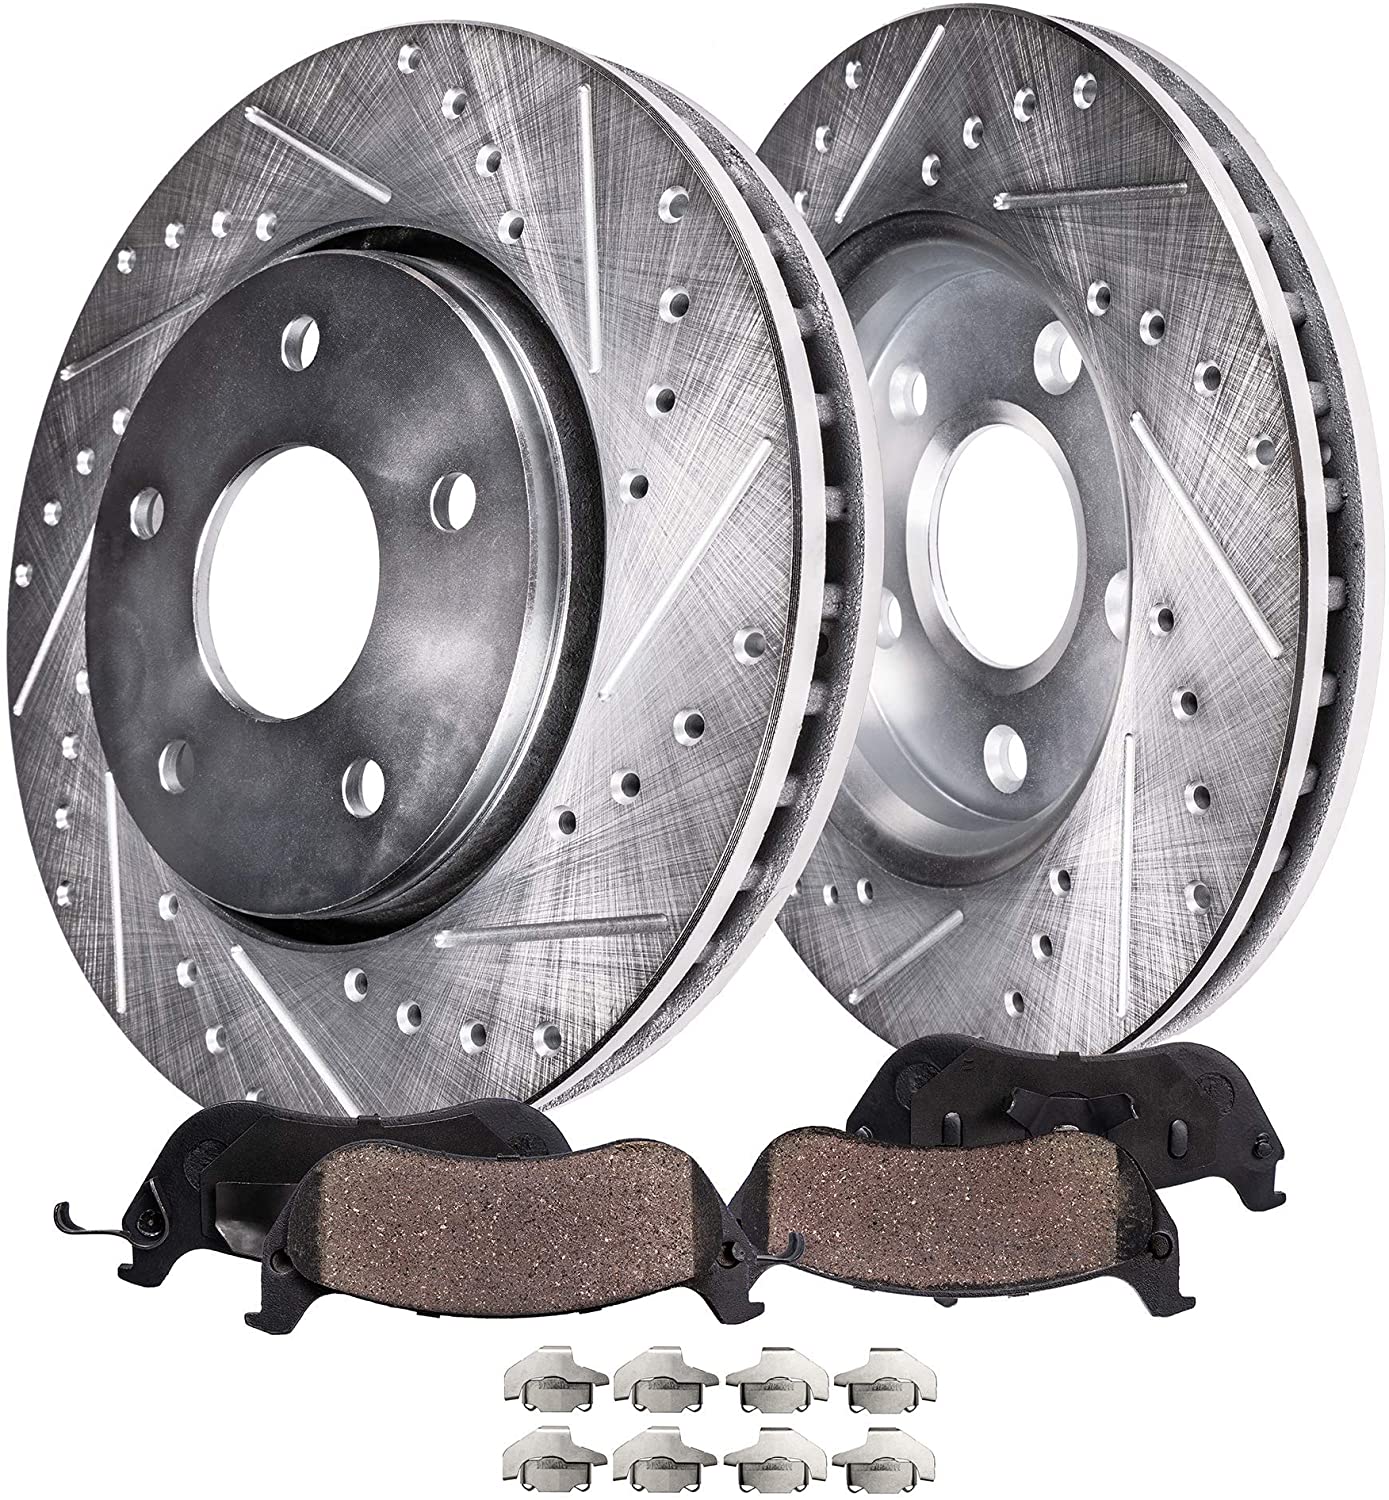 Detroit Axle - 302MM Drilled & Slotted Front Brake Kit Rotor Set & Pads w/Hardware Clip for 08-10 Town & Country - [08-10 Dodge Grand Caravan/Journey] - 09-10 VW Routan - Check Fitment Before Ordering